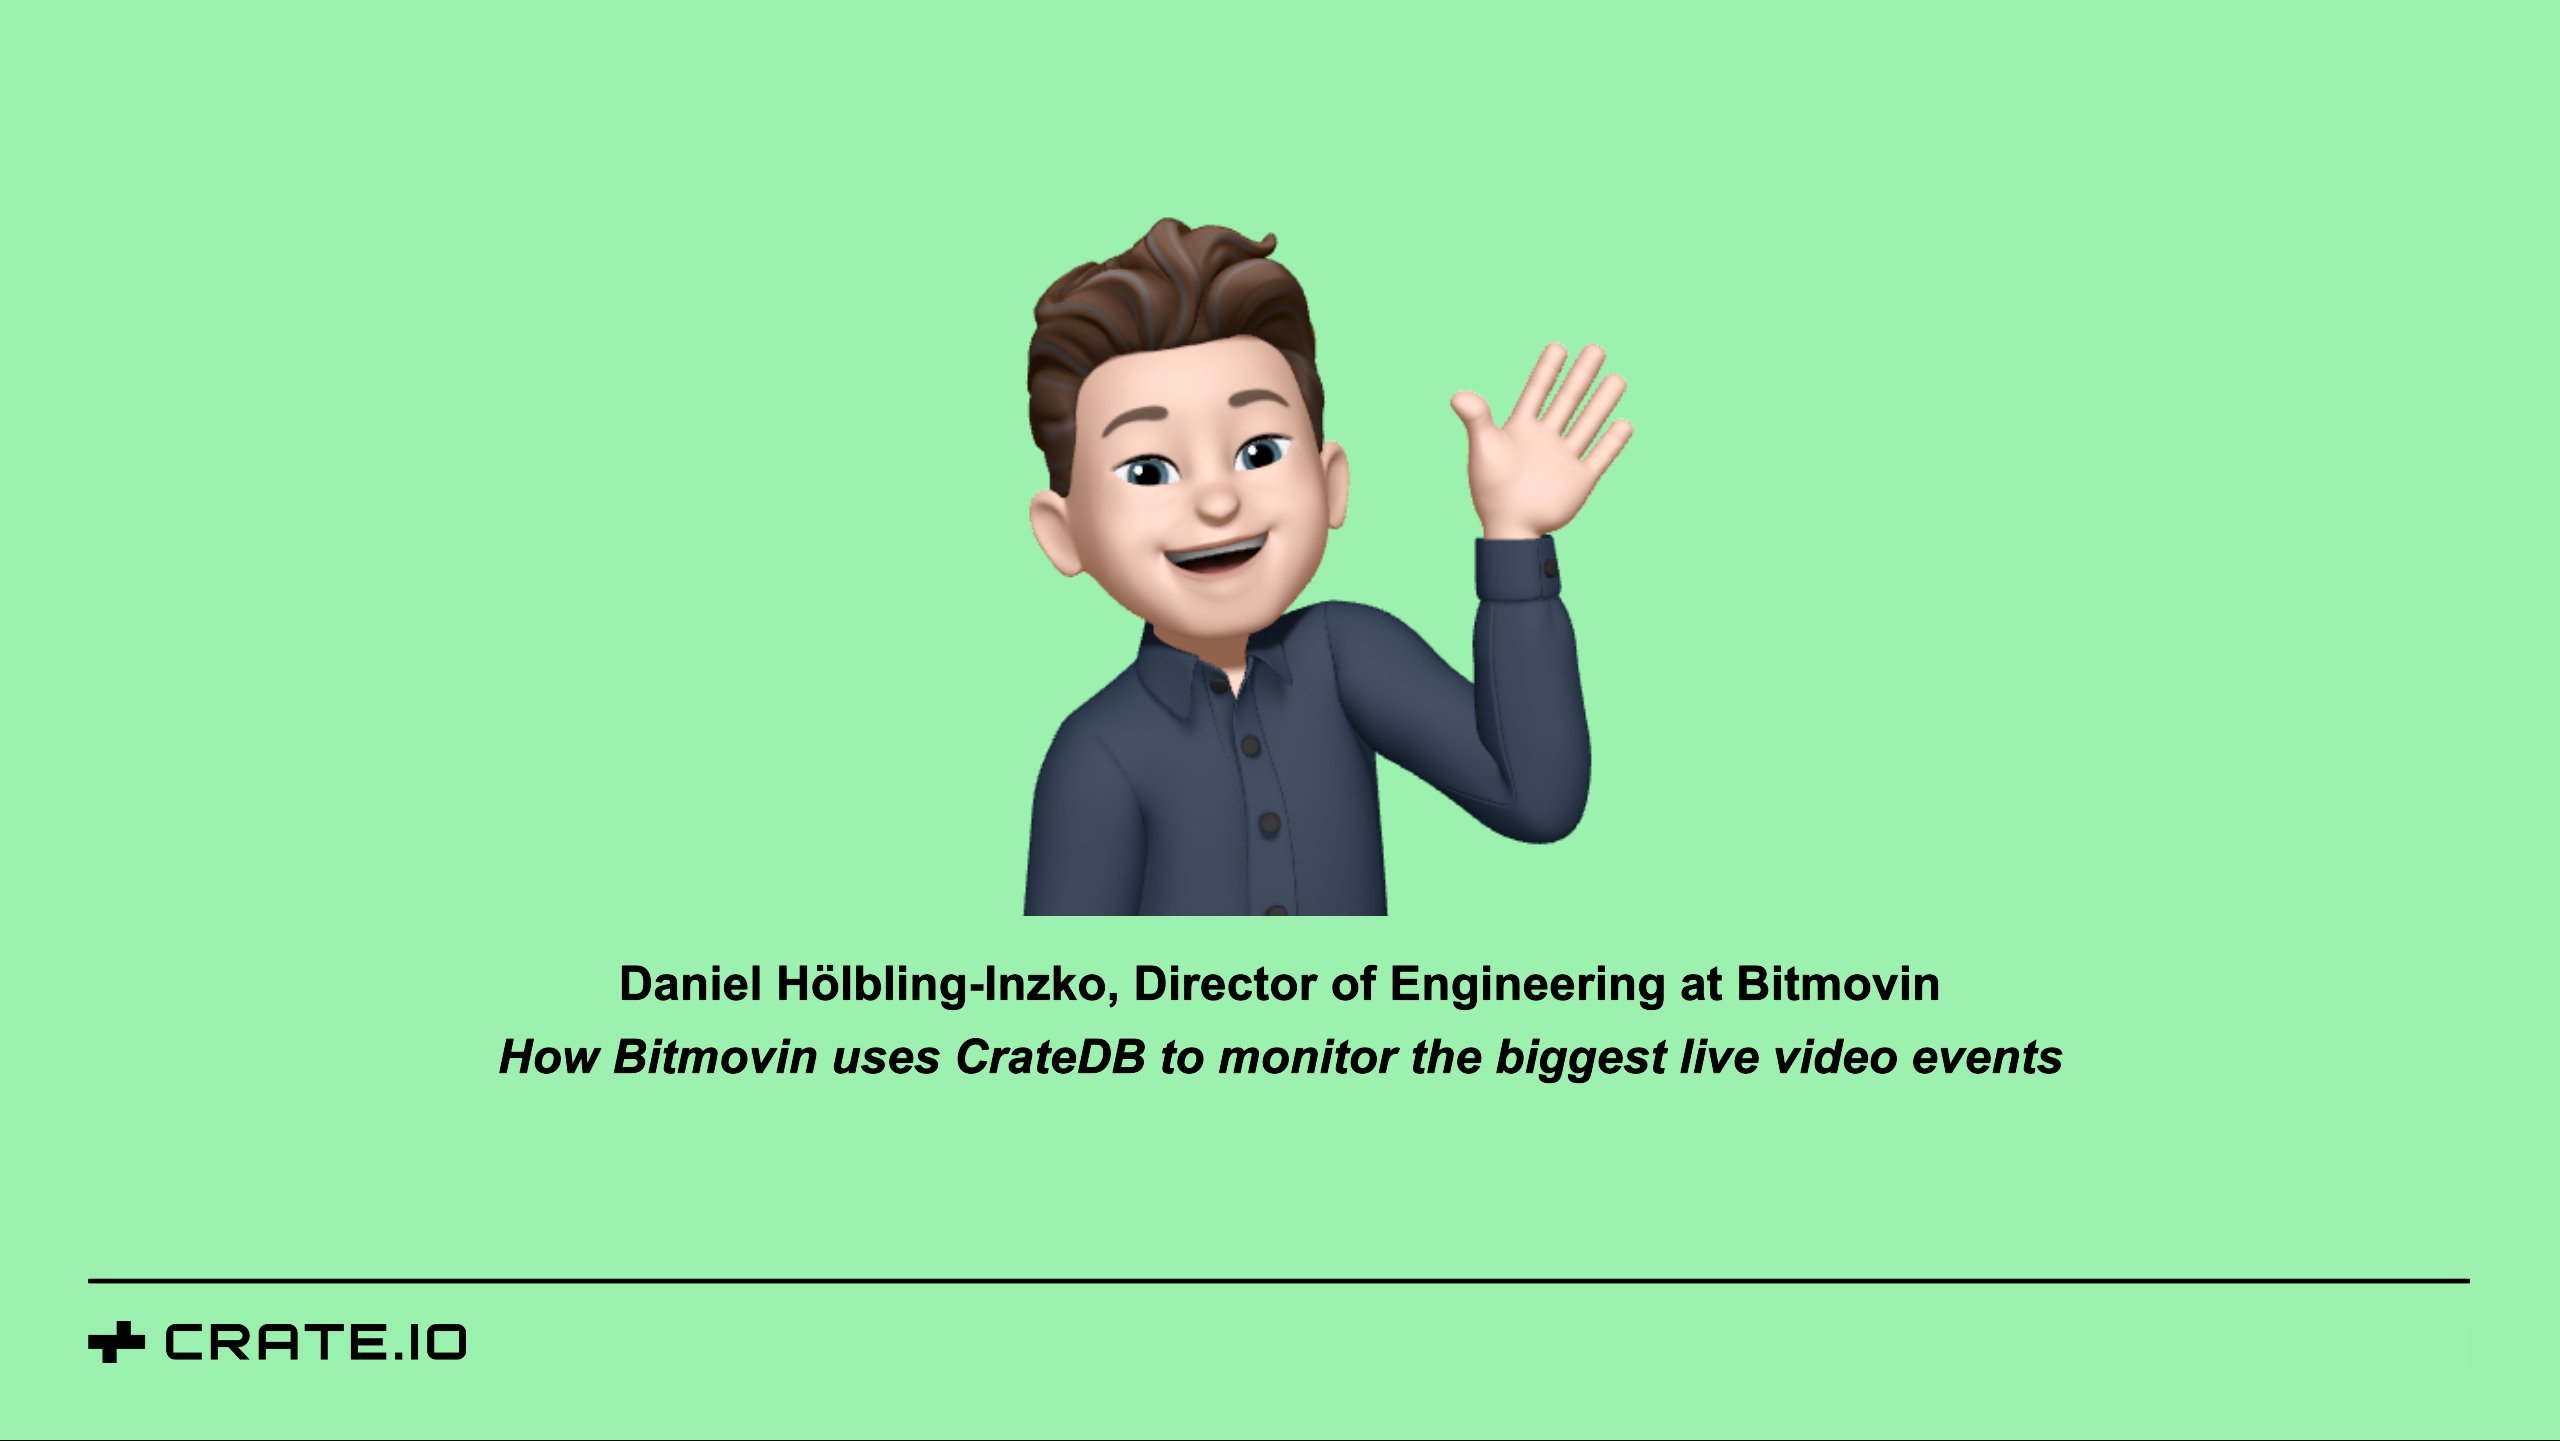 How Bitmovin uses CrateDB to monitor the biggest live video events